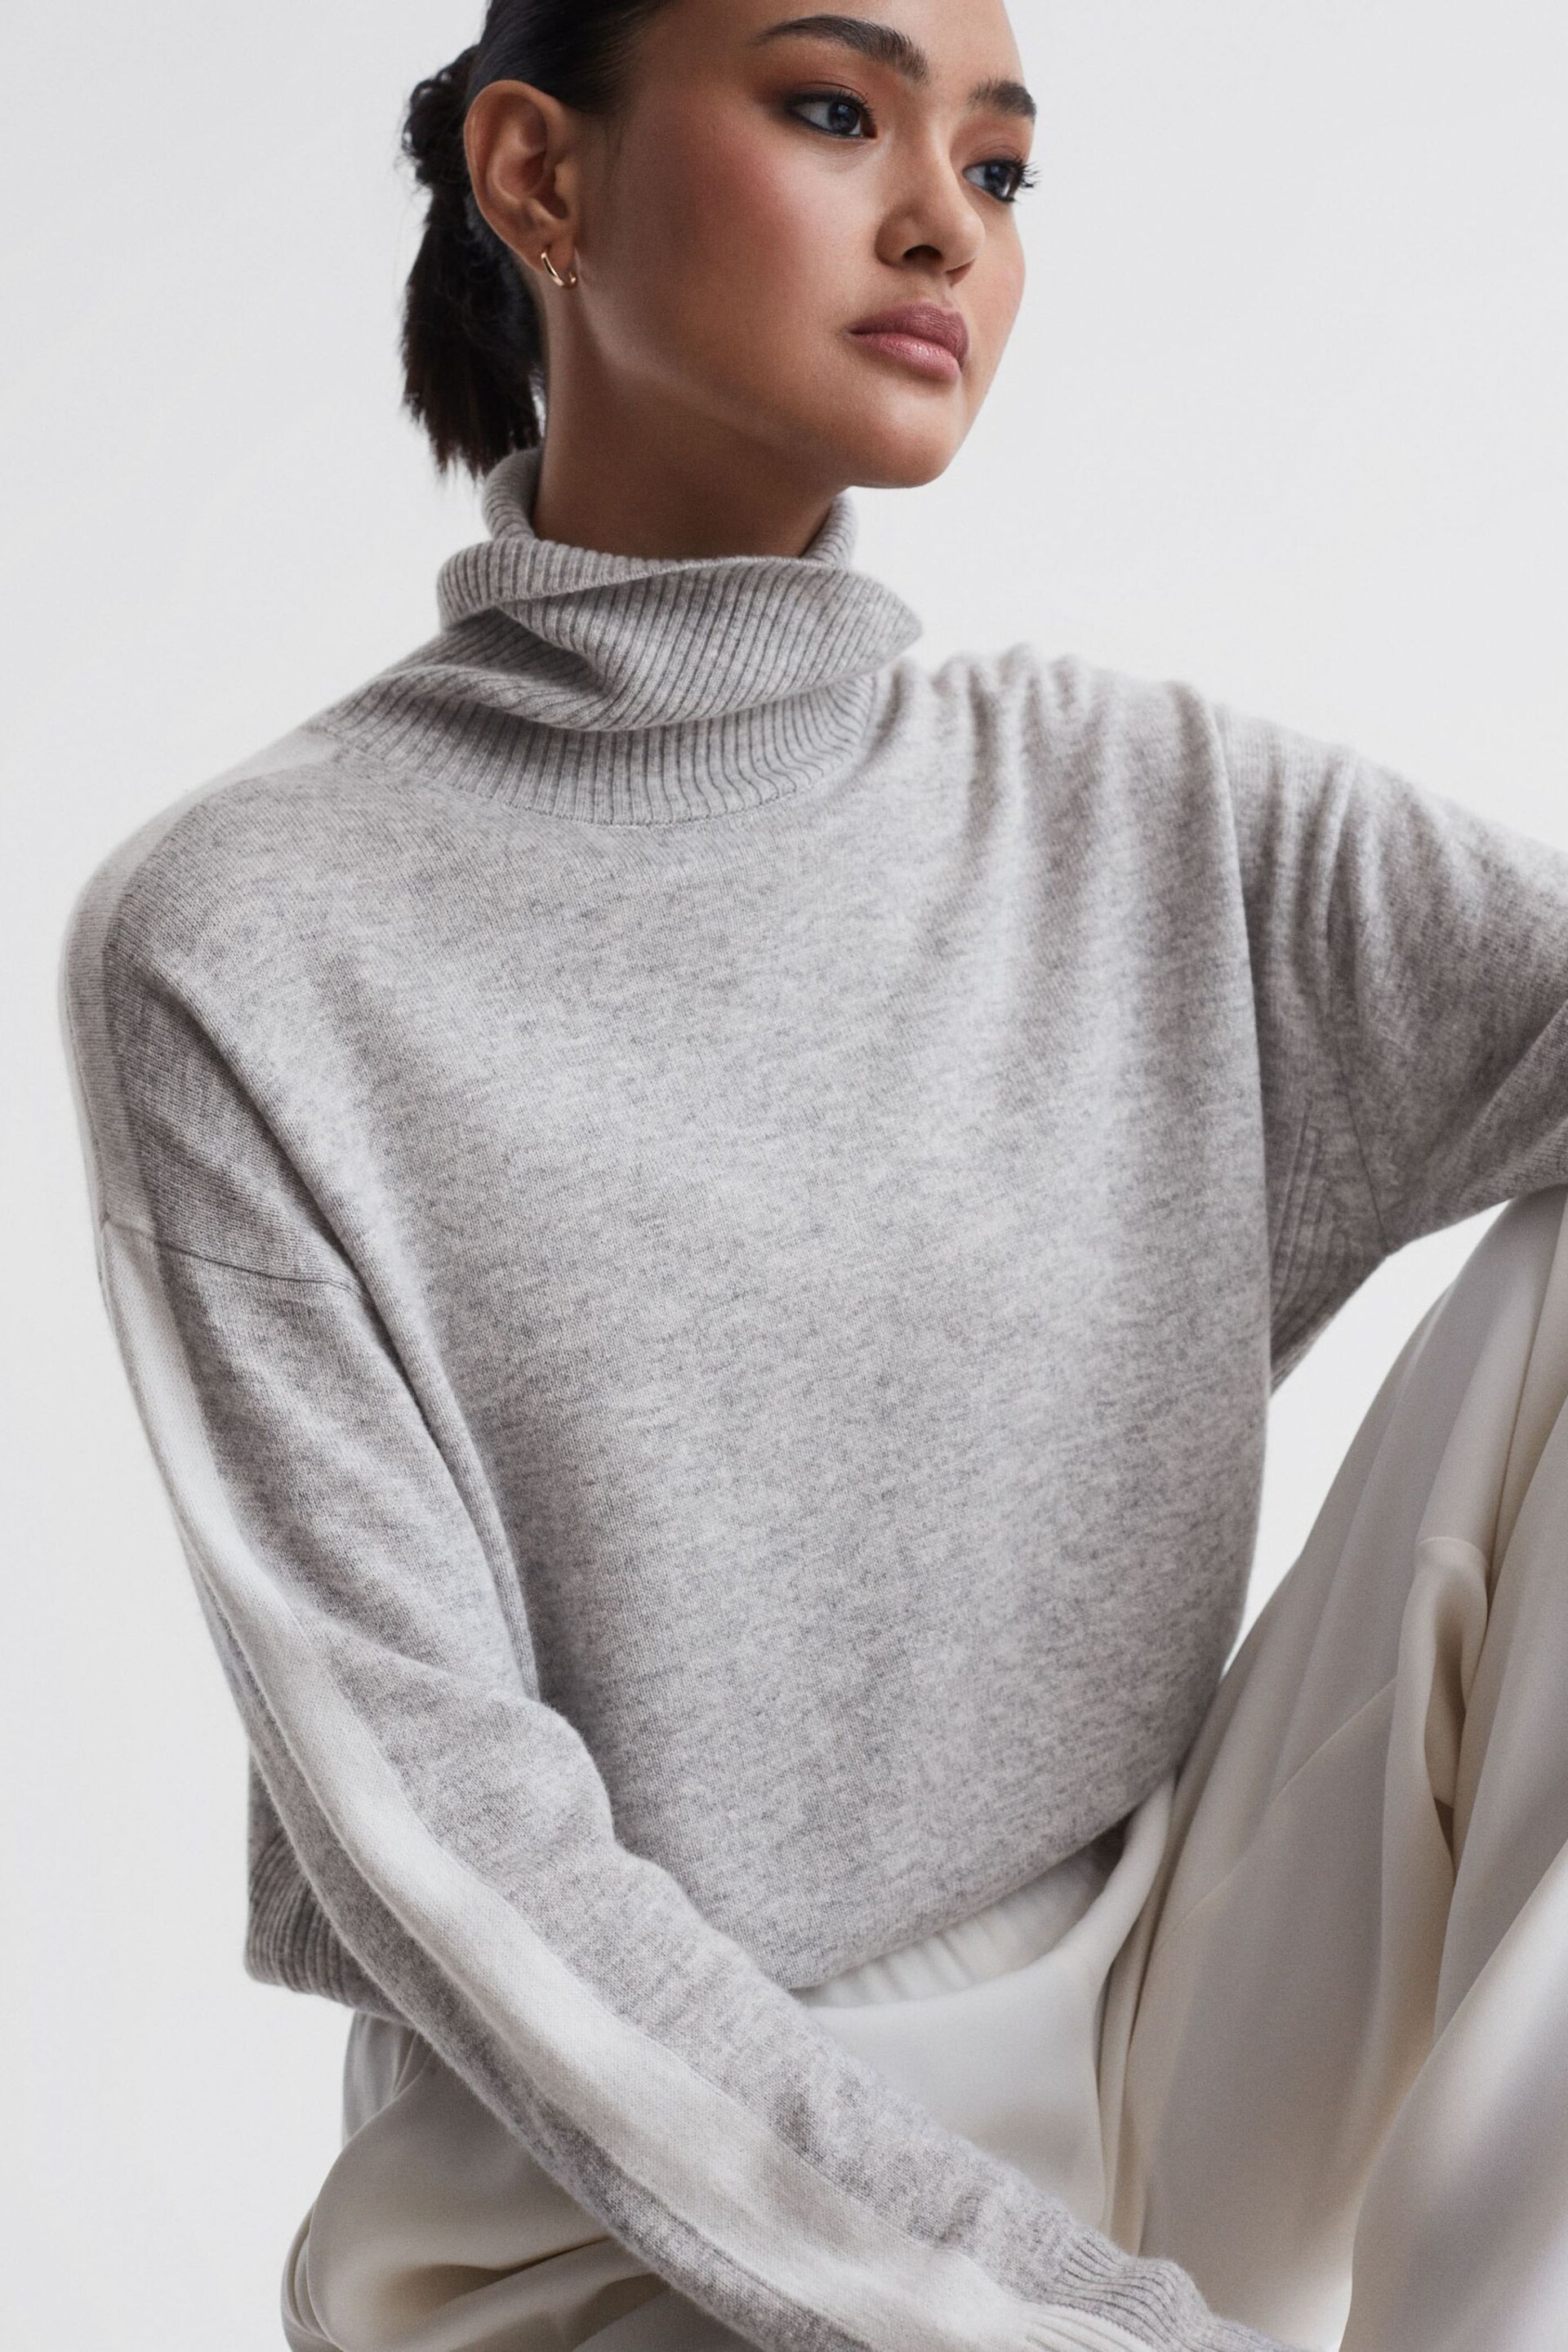 Reiss Grey/White Alexis Wool Blend Roll Neck Jumper - Image 1 of 5